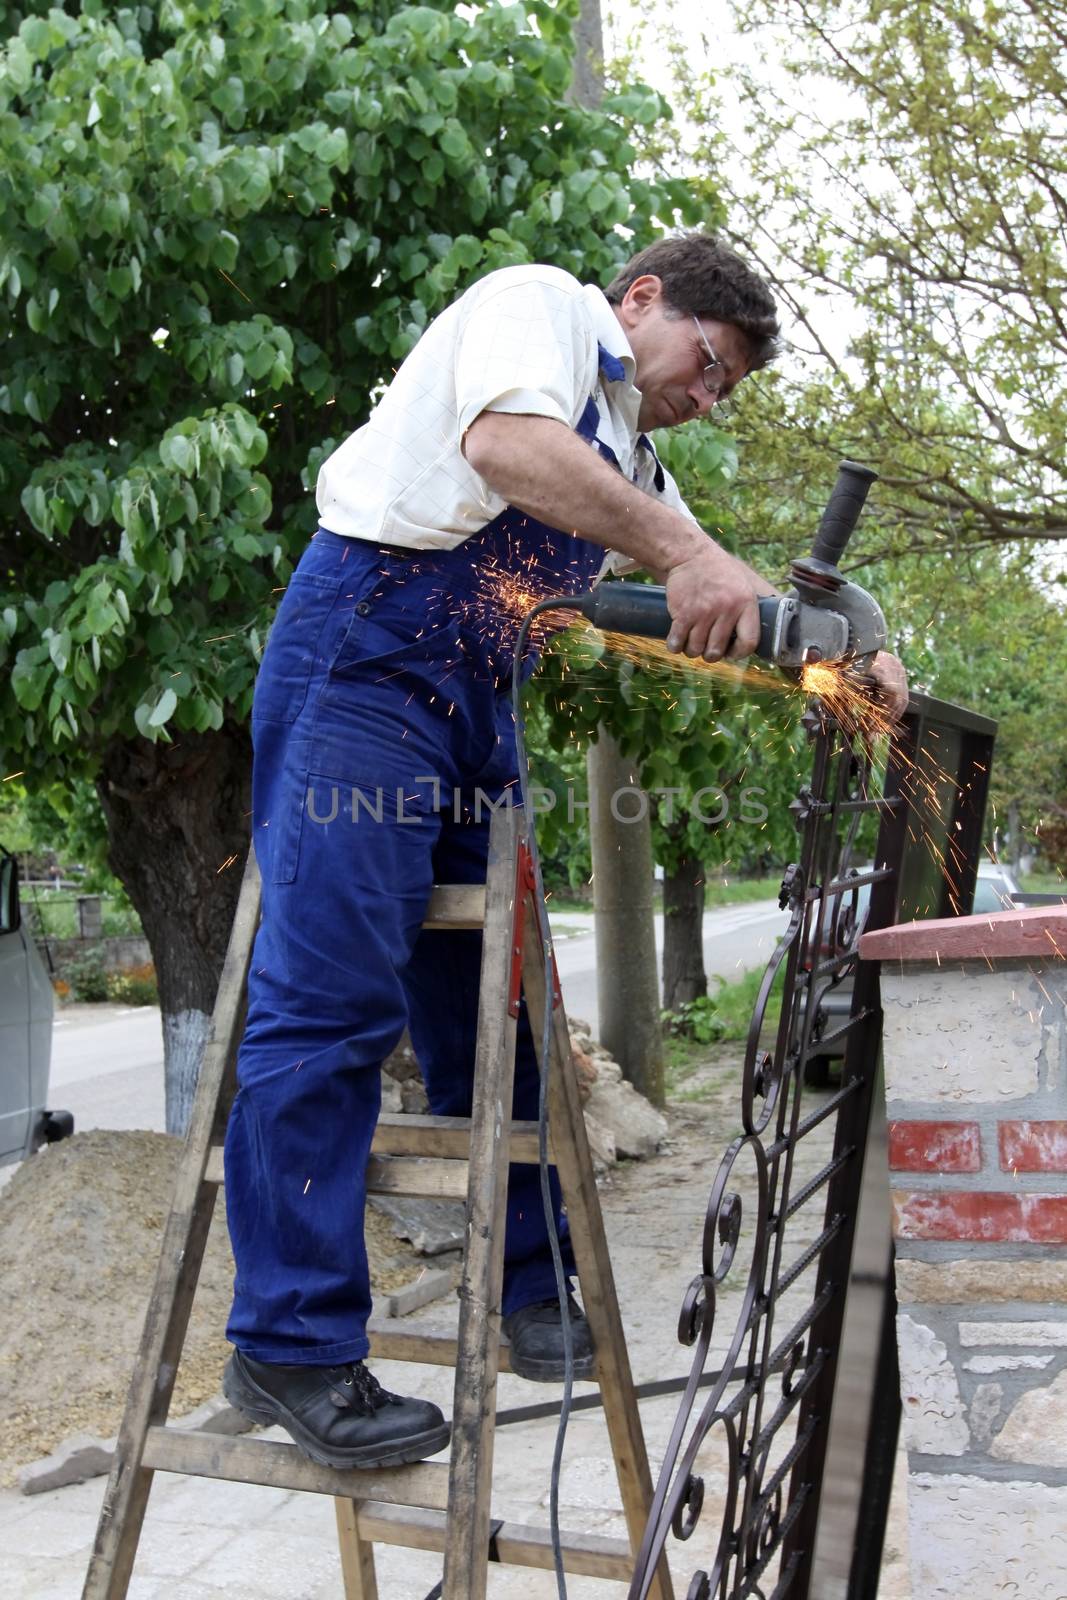 a worker working with Angle Grinder